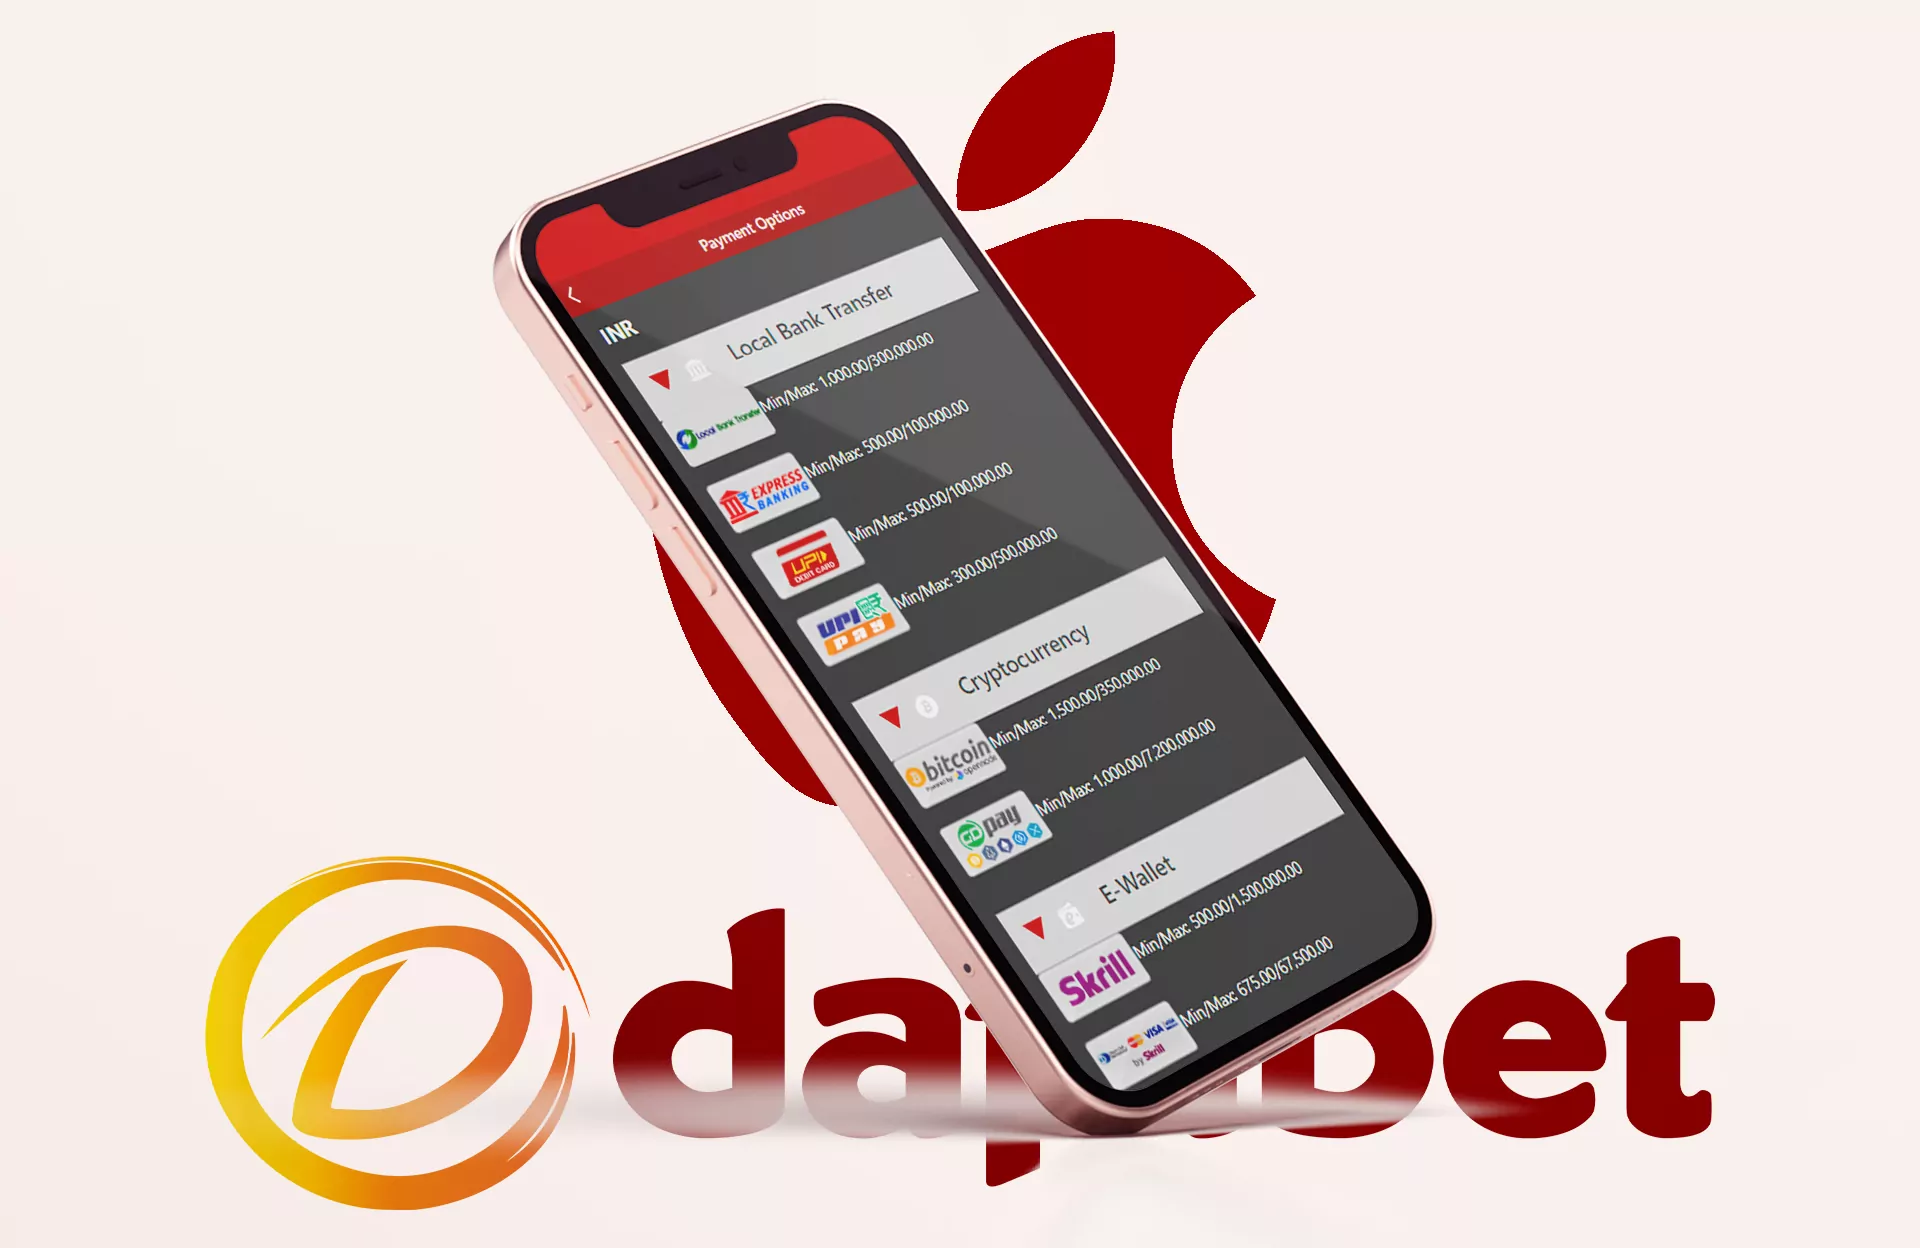 You can download the Dafabet app on your iPhone.